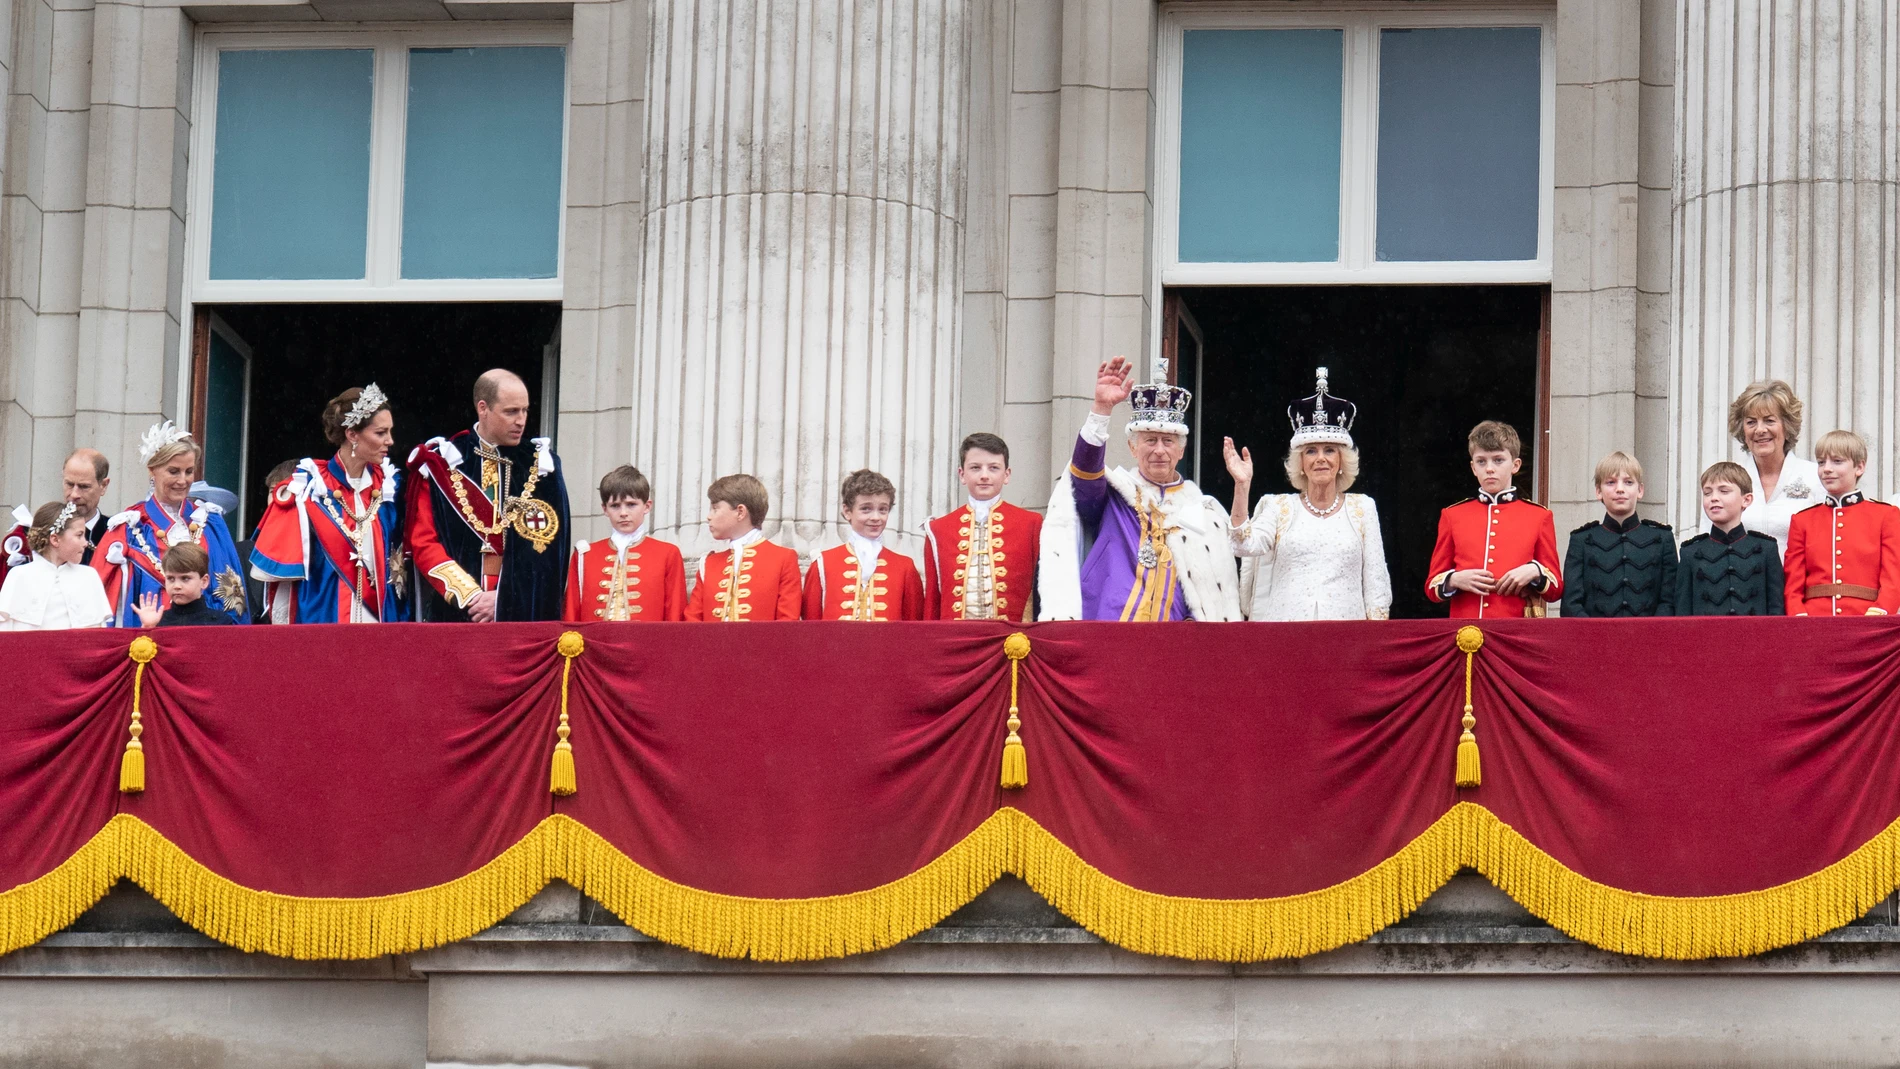 King Charles III and Queen Camilla appear on the balcony of Buckingham Palace, London, with members of the royal family after the coronation ceremony, Saturday, May 6, 2023. (Stefan Rousseau/Pool via AP)